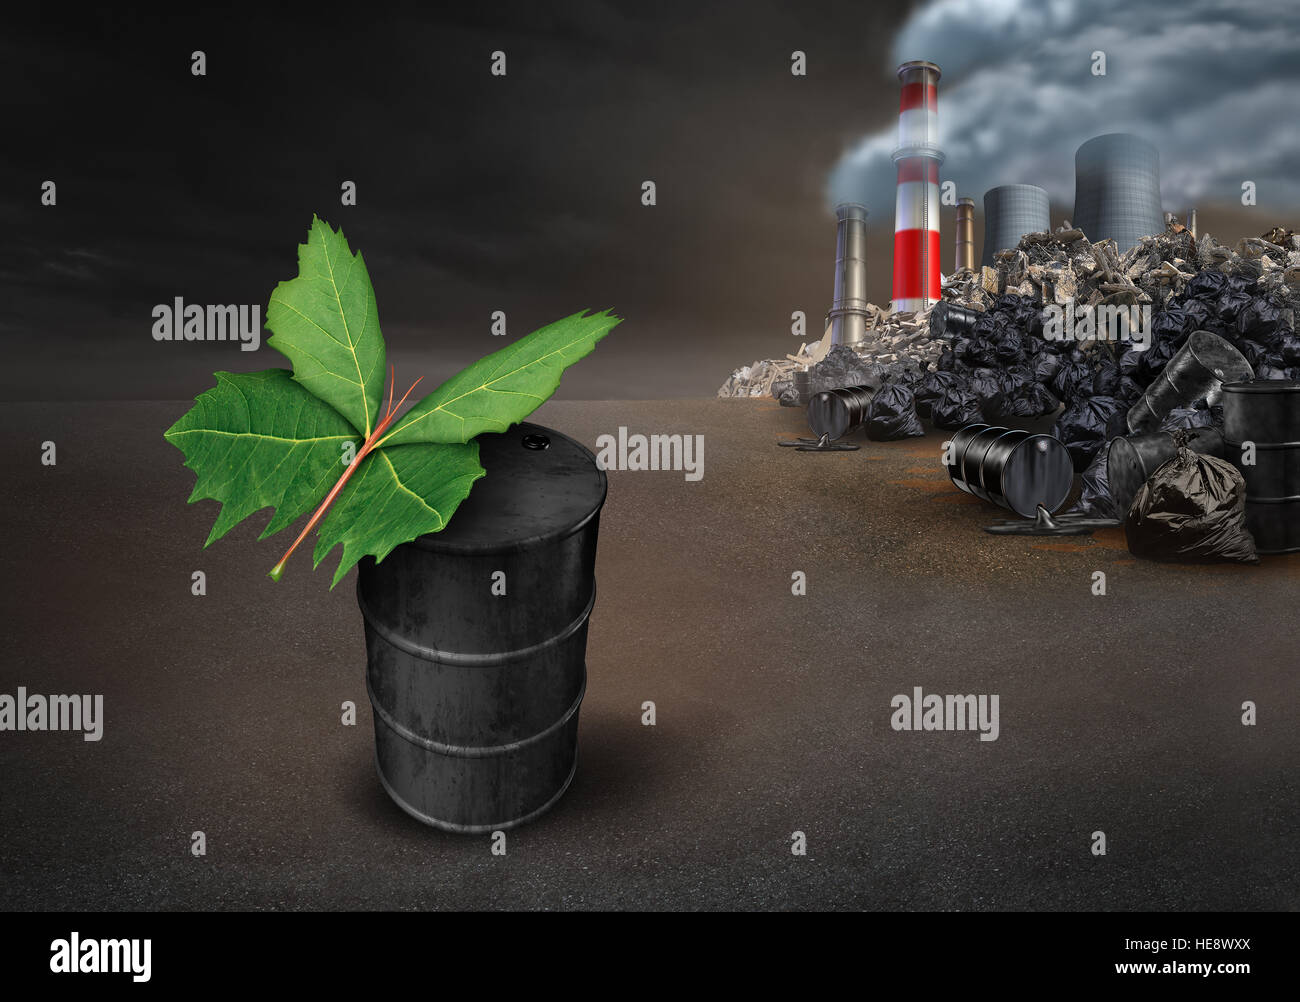 Pollution conservation hope environmental concept as a leaf shaped as a butterfly on an old dirty petroleum oil can with industrial urban pollution la Stock Photo